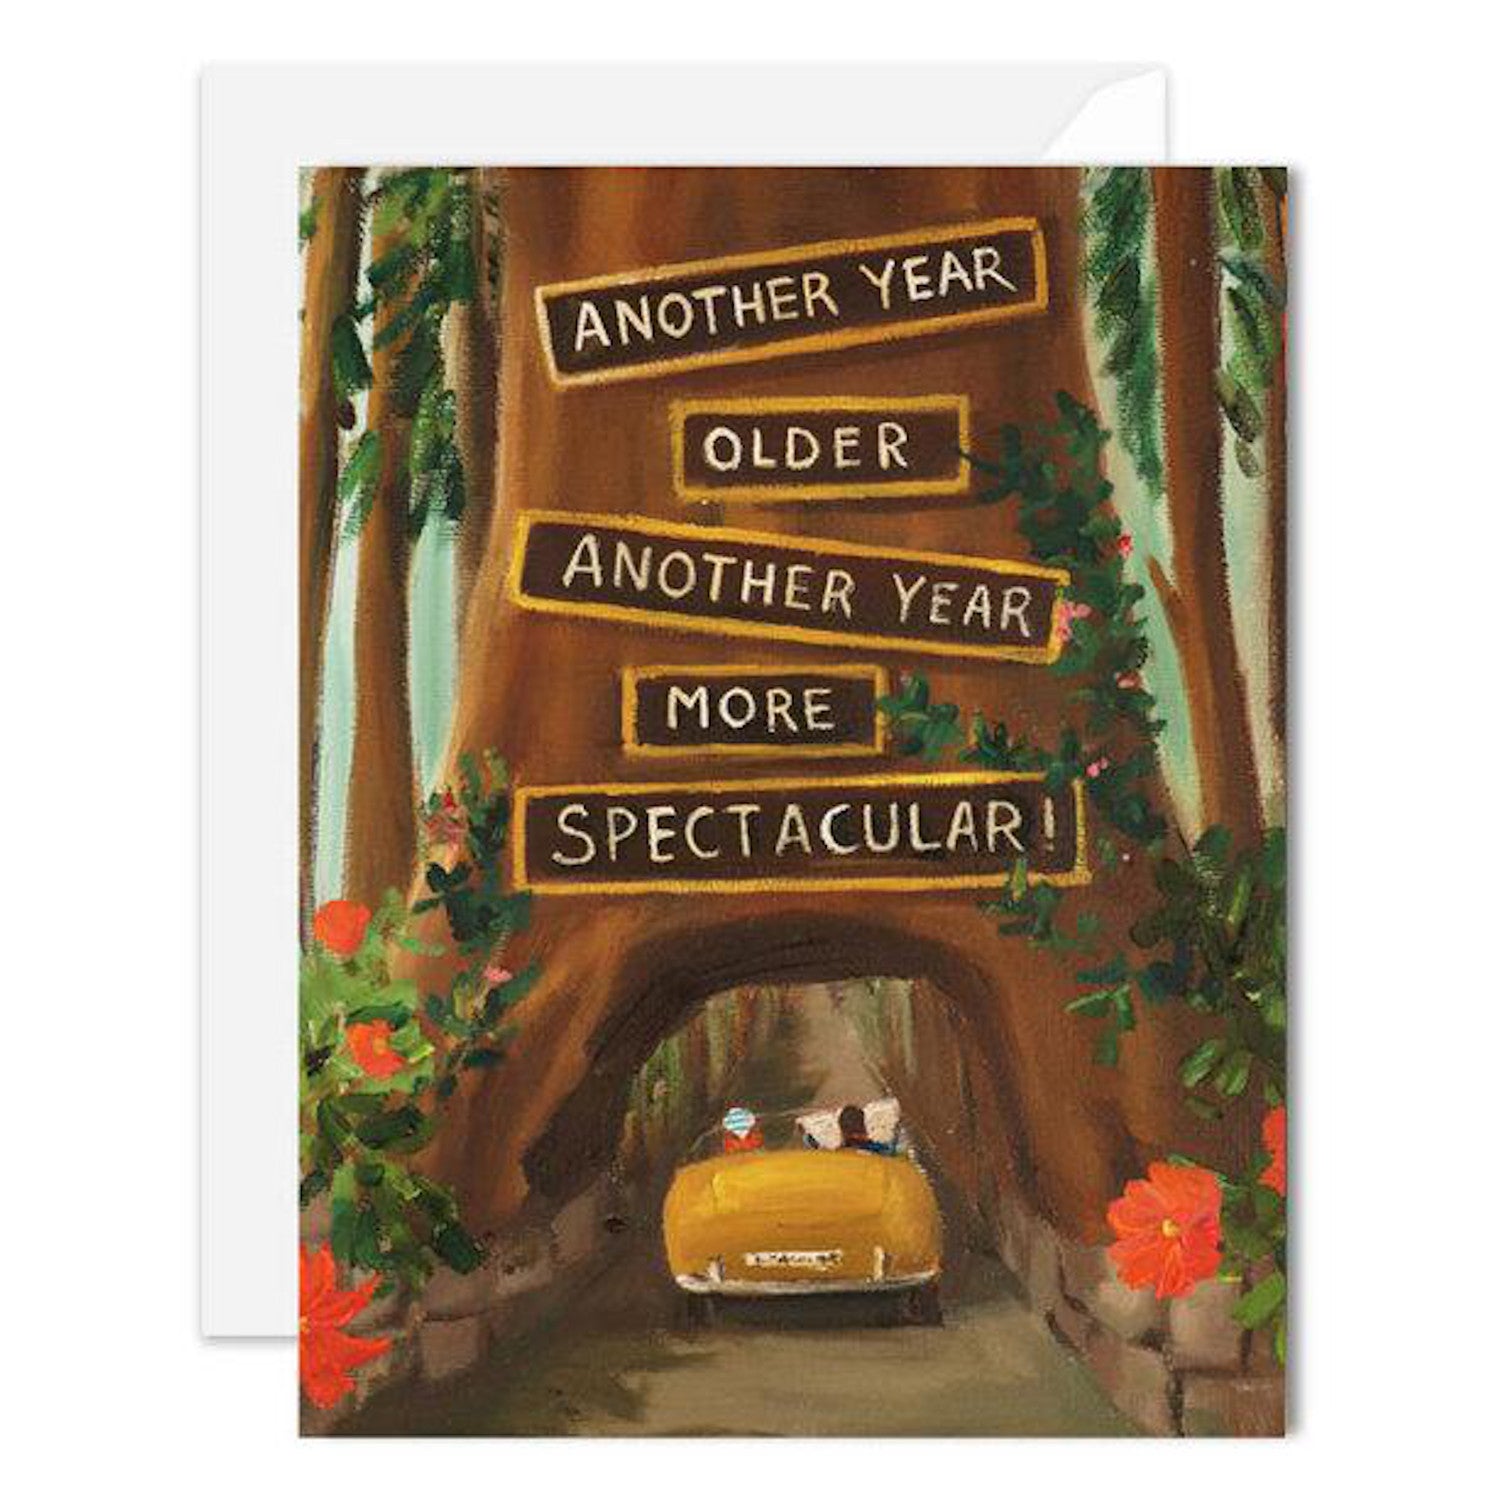 A Redwood Birthday Greeting Card featuring a car driving through a tree, created by Janet Hill on recycled card stock.